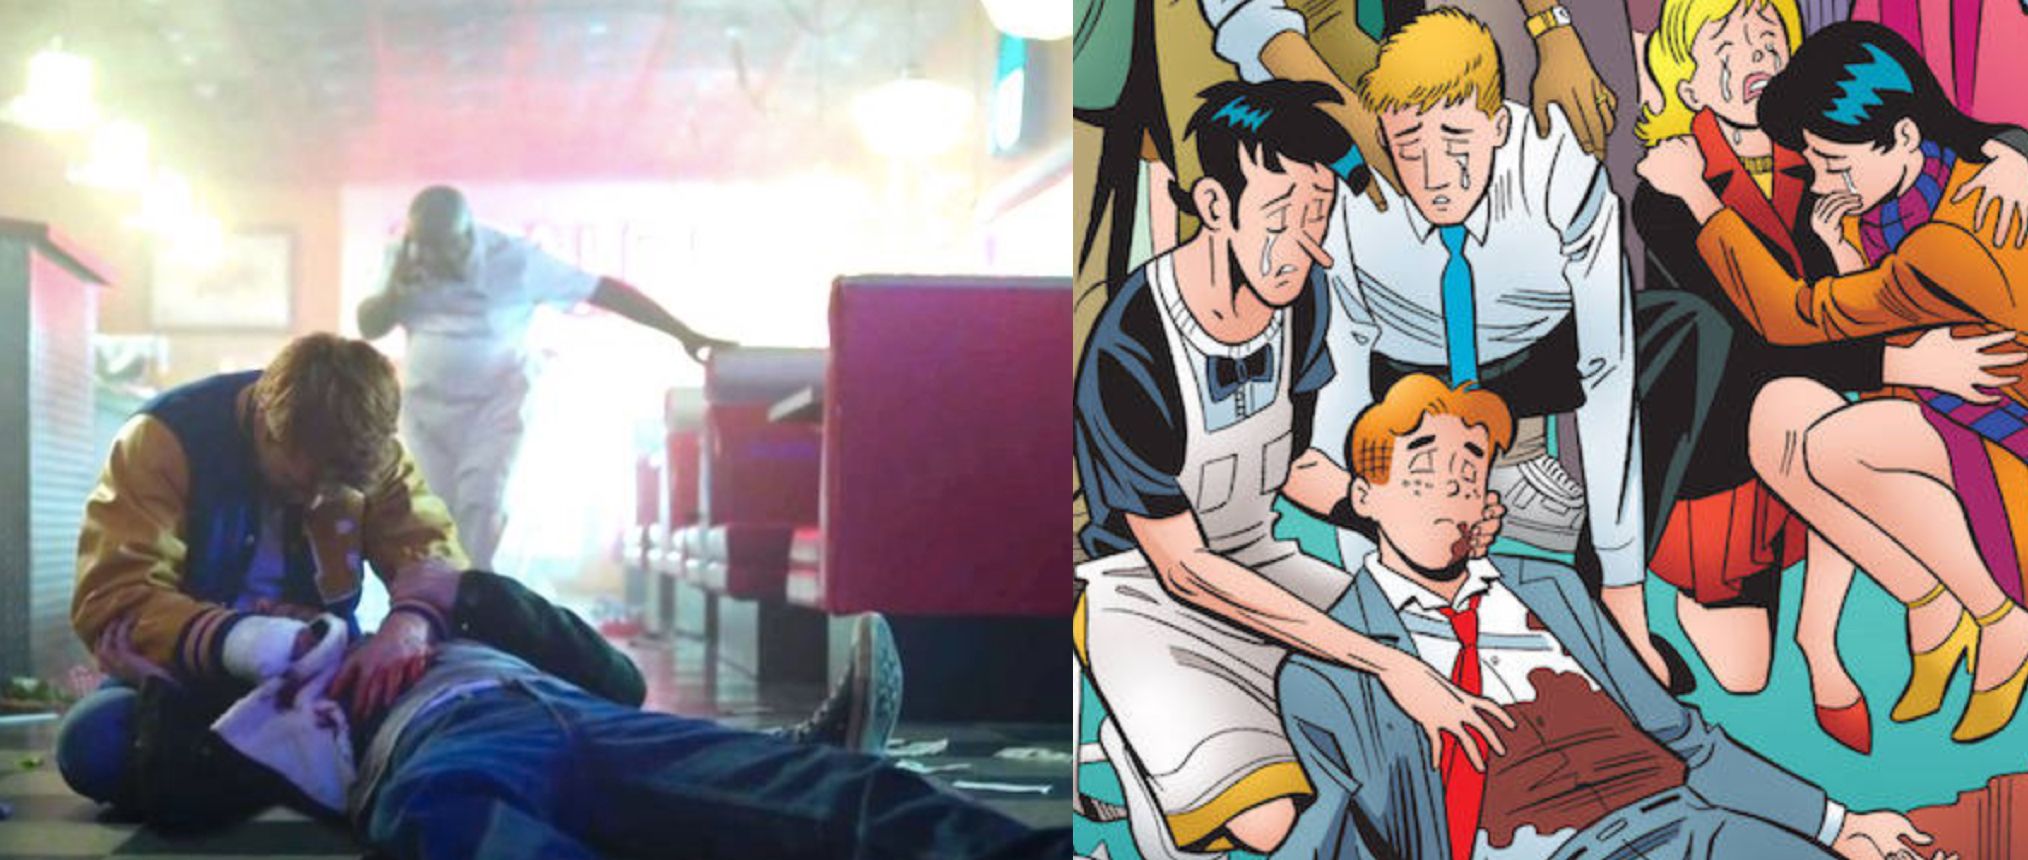 Riverdale Season One Finale Homages Death of Archie Comic Story